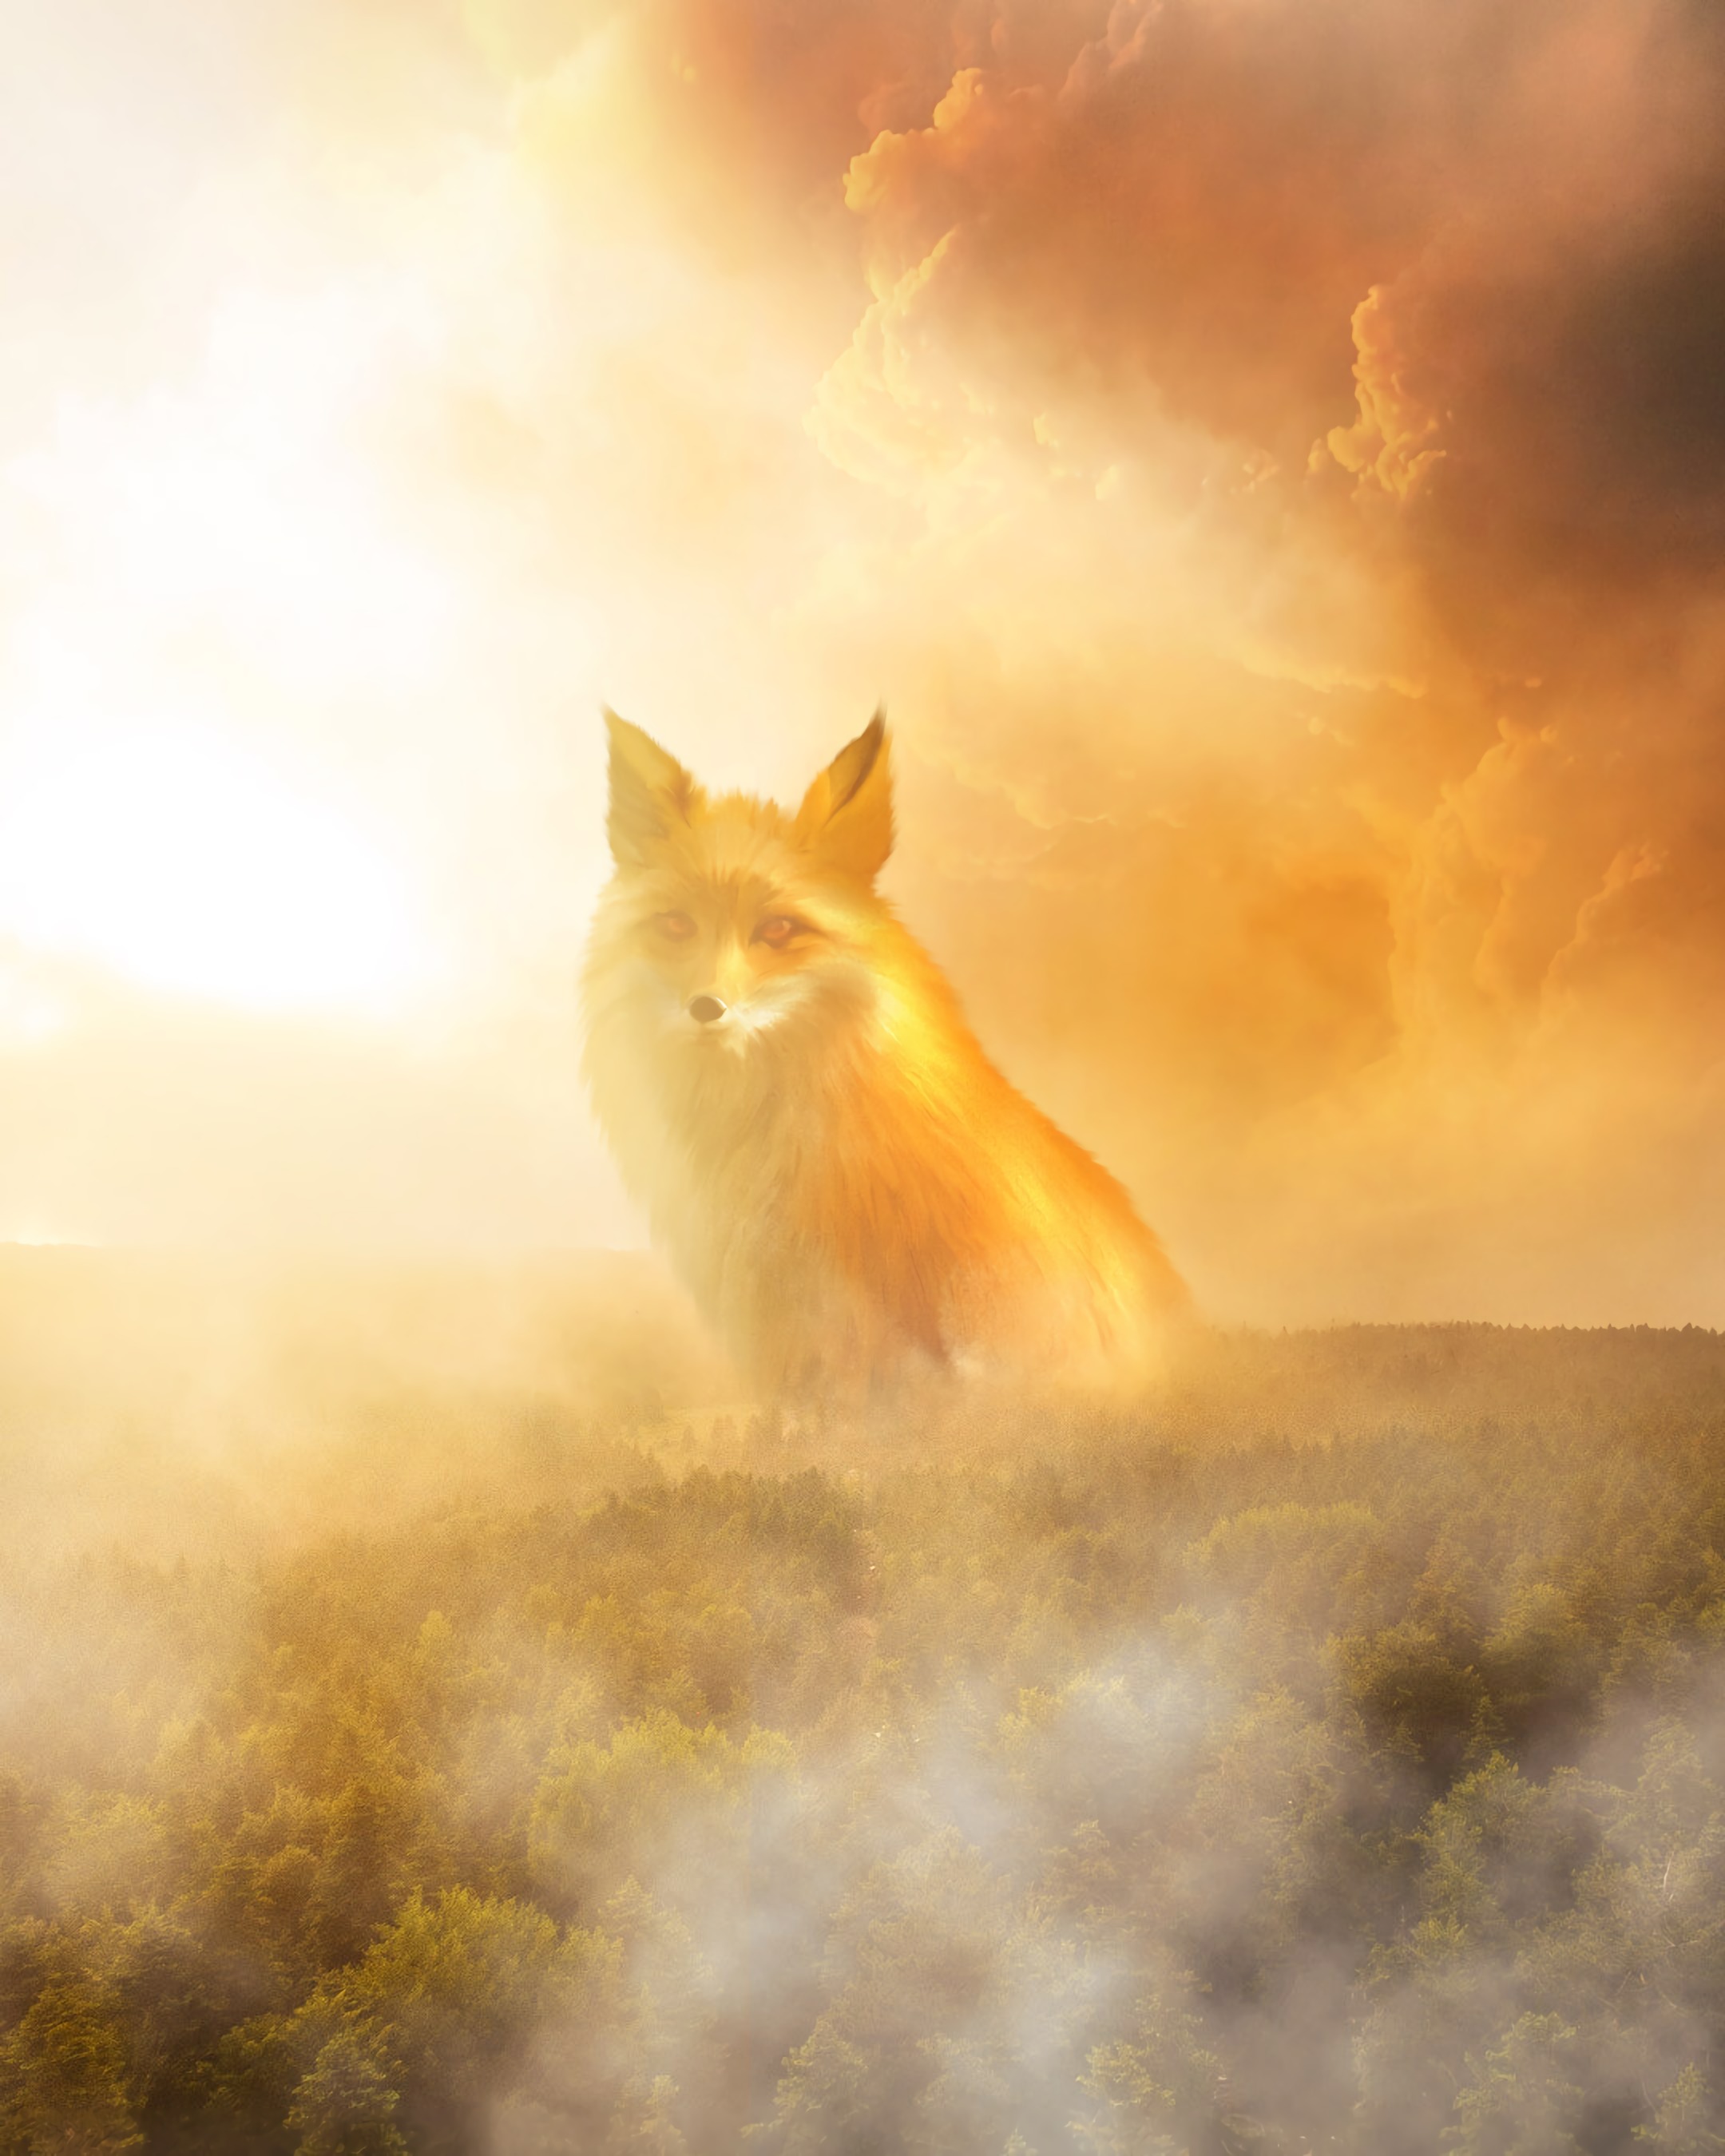 68687 download wallpaper fox, animals, clouds, forest, fog, haze screensavers and pictures for free